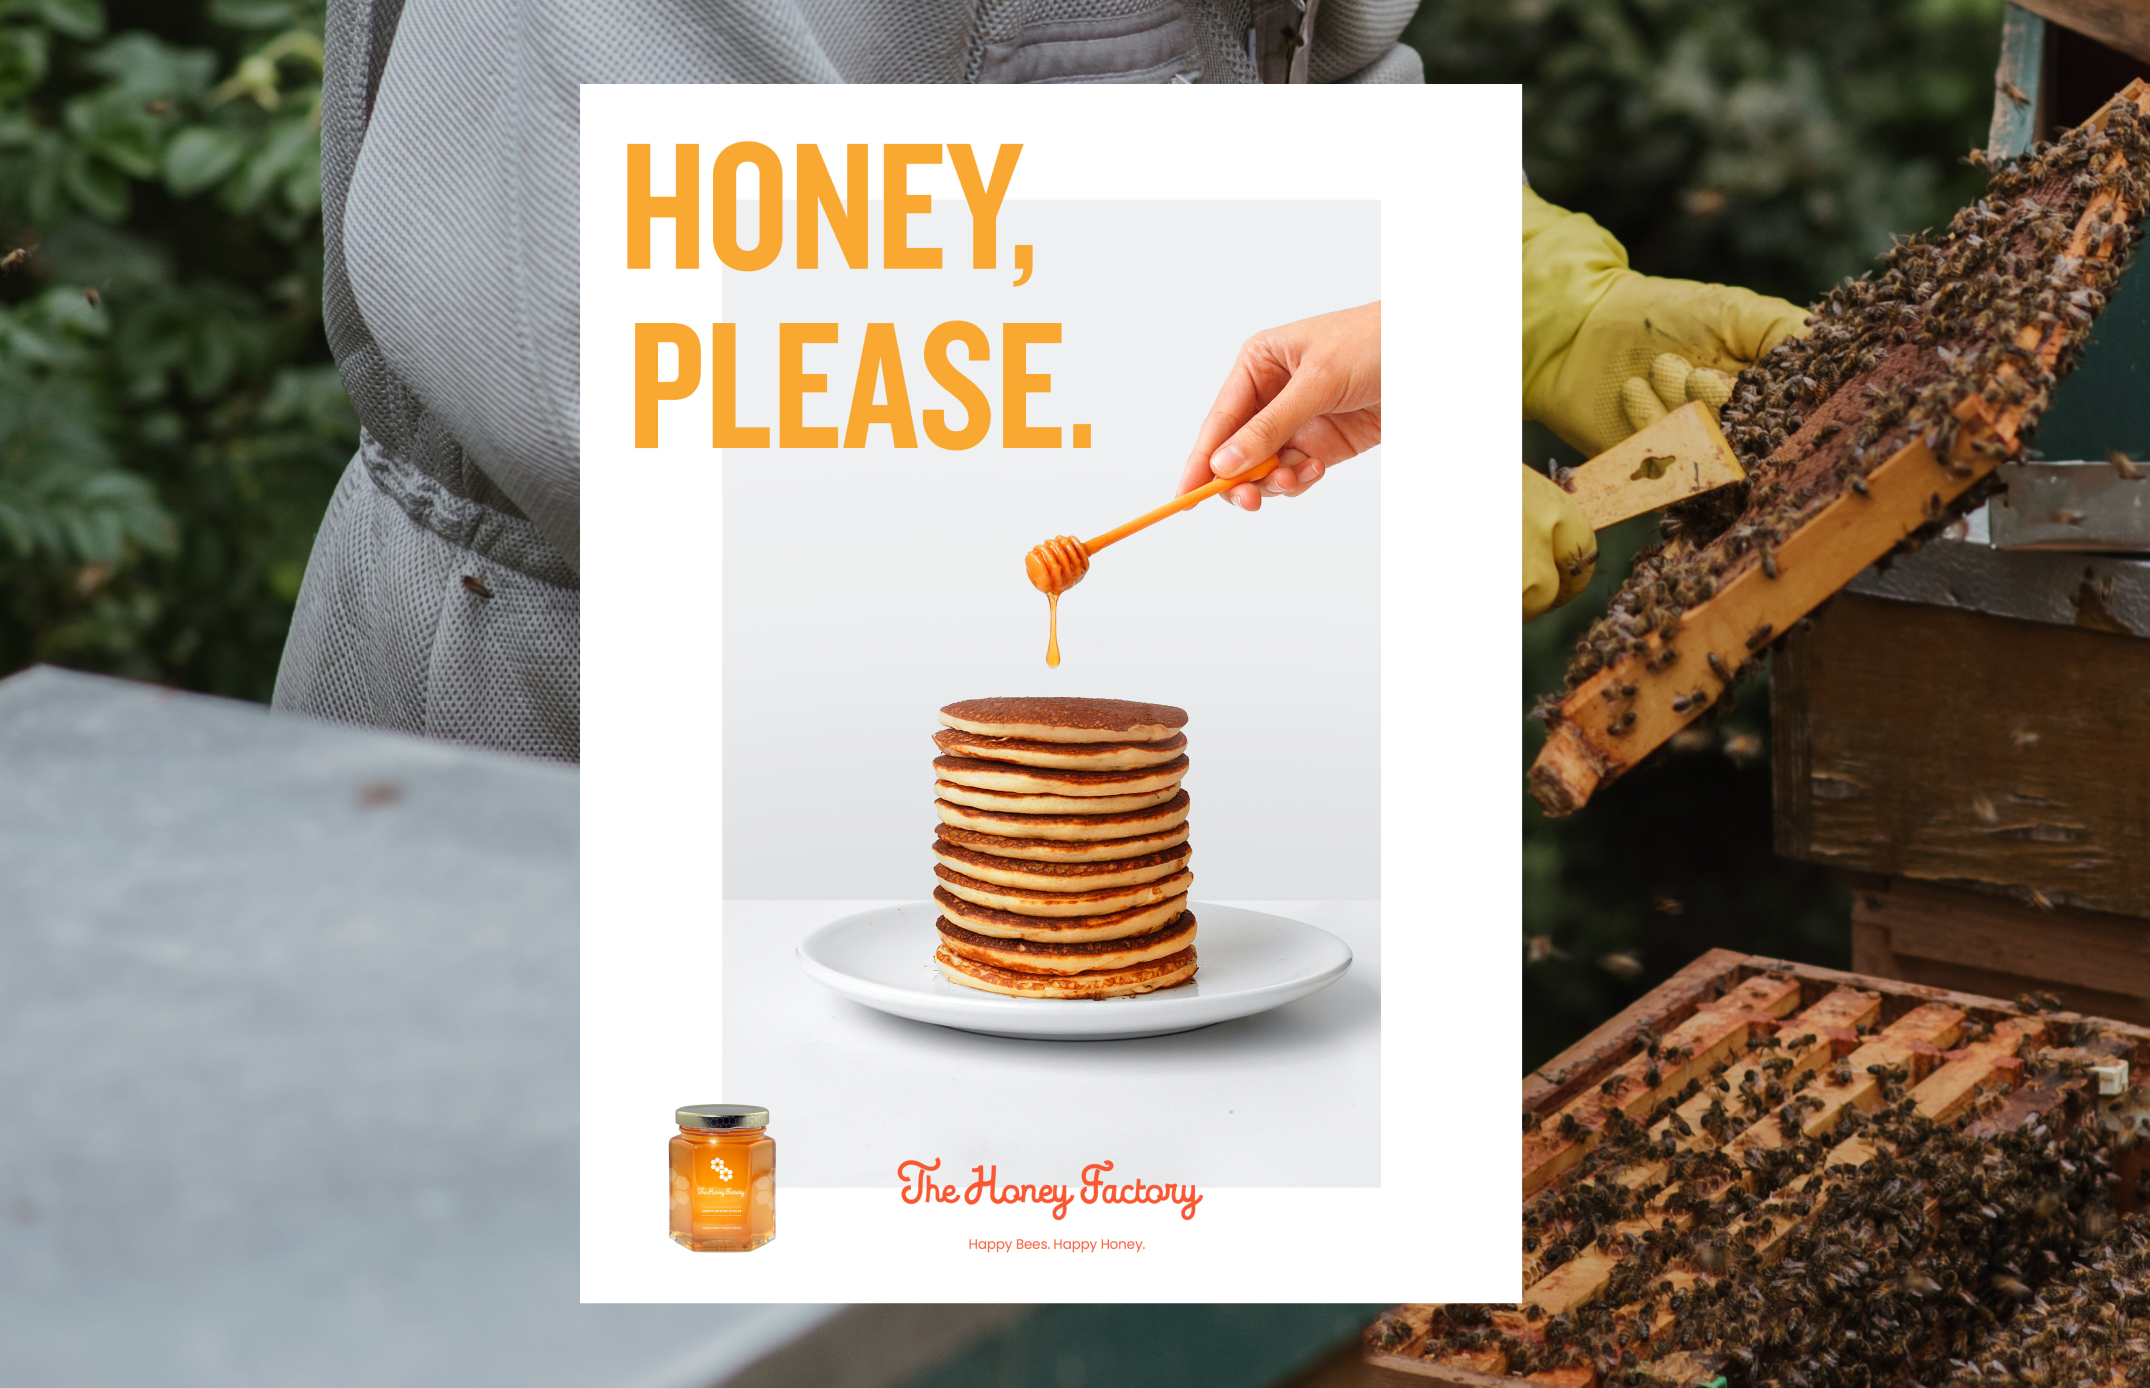 A beekeeper in a suit getting honey with a stack of pancakes and headline 'Honey, Please'.